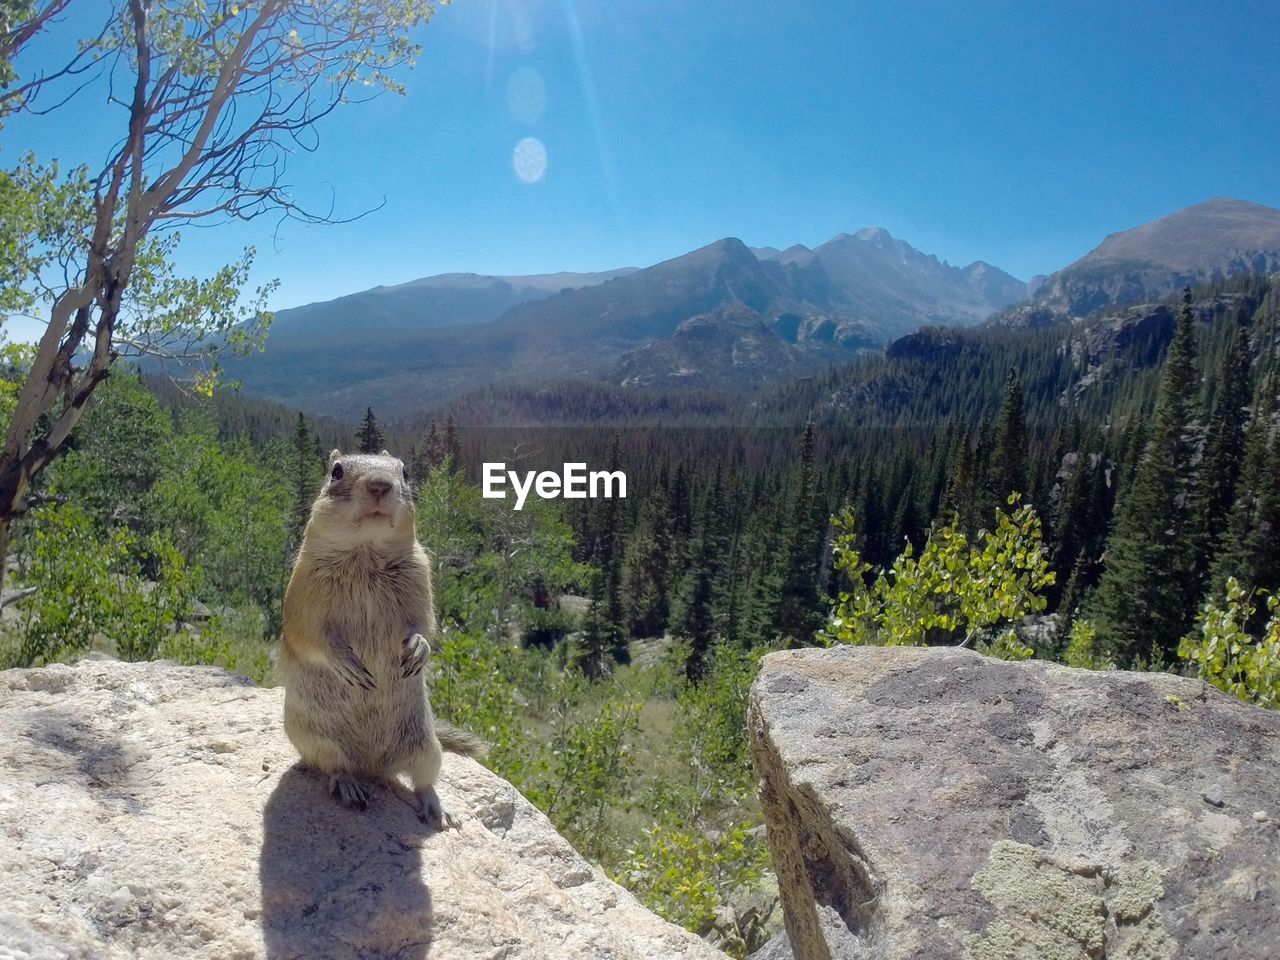 Squirrel sitting on rock against mountain during sunny day